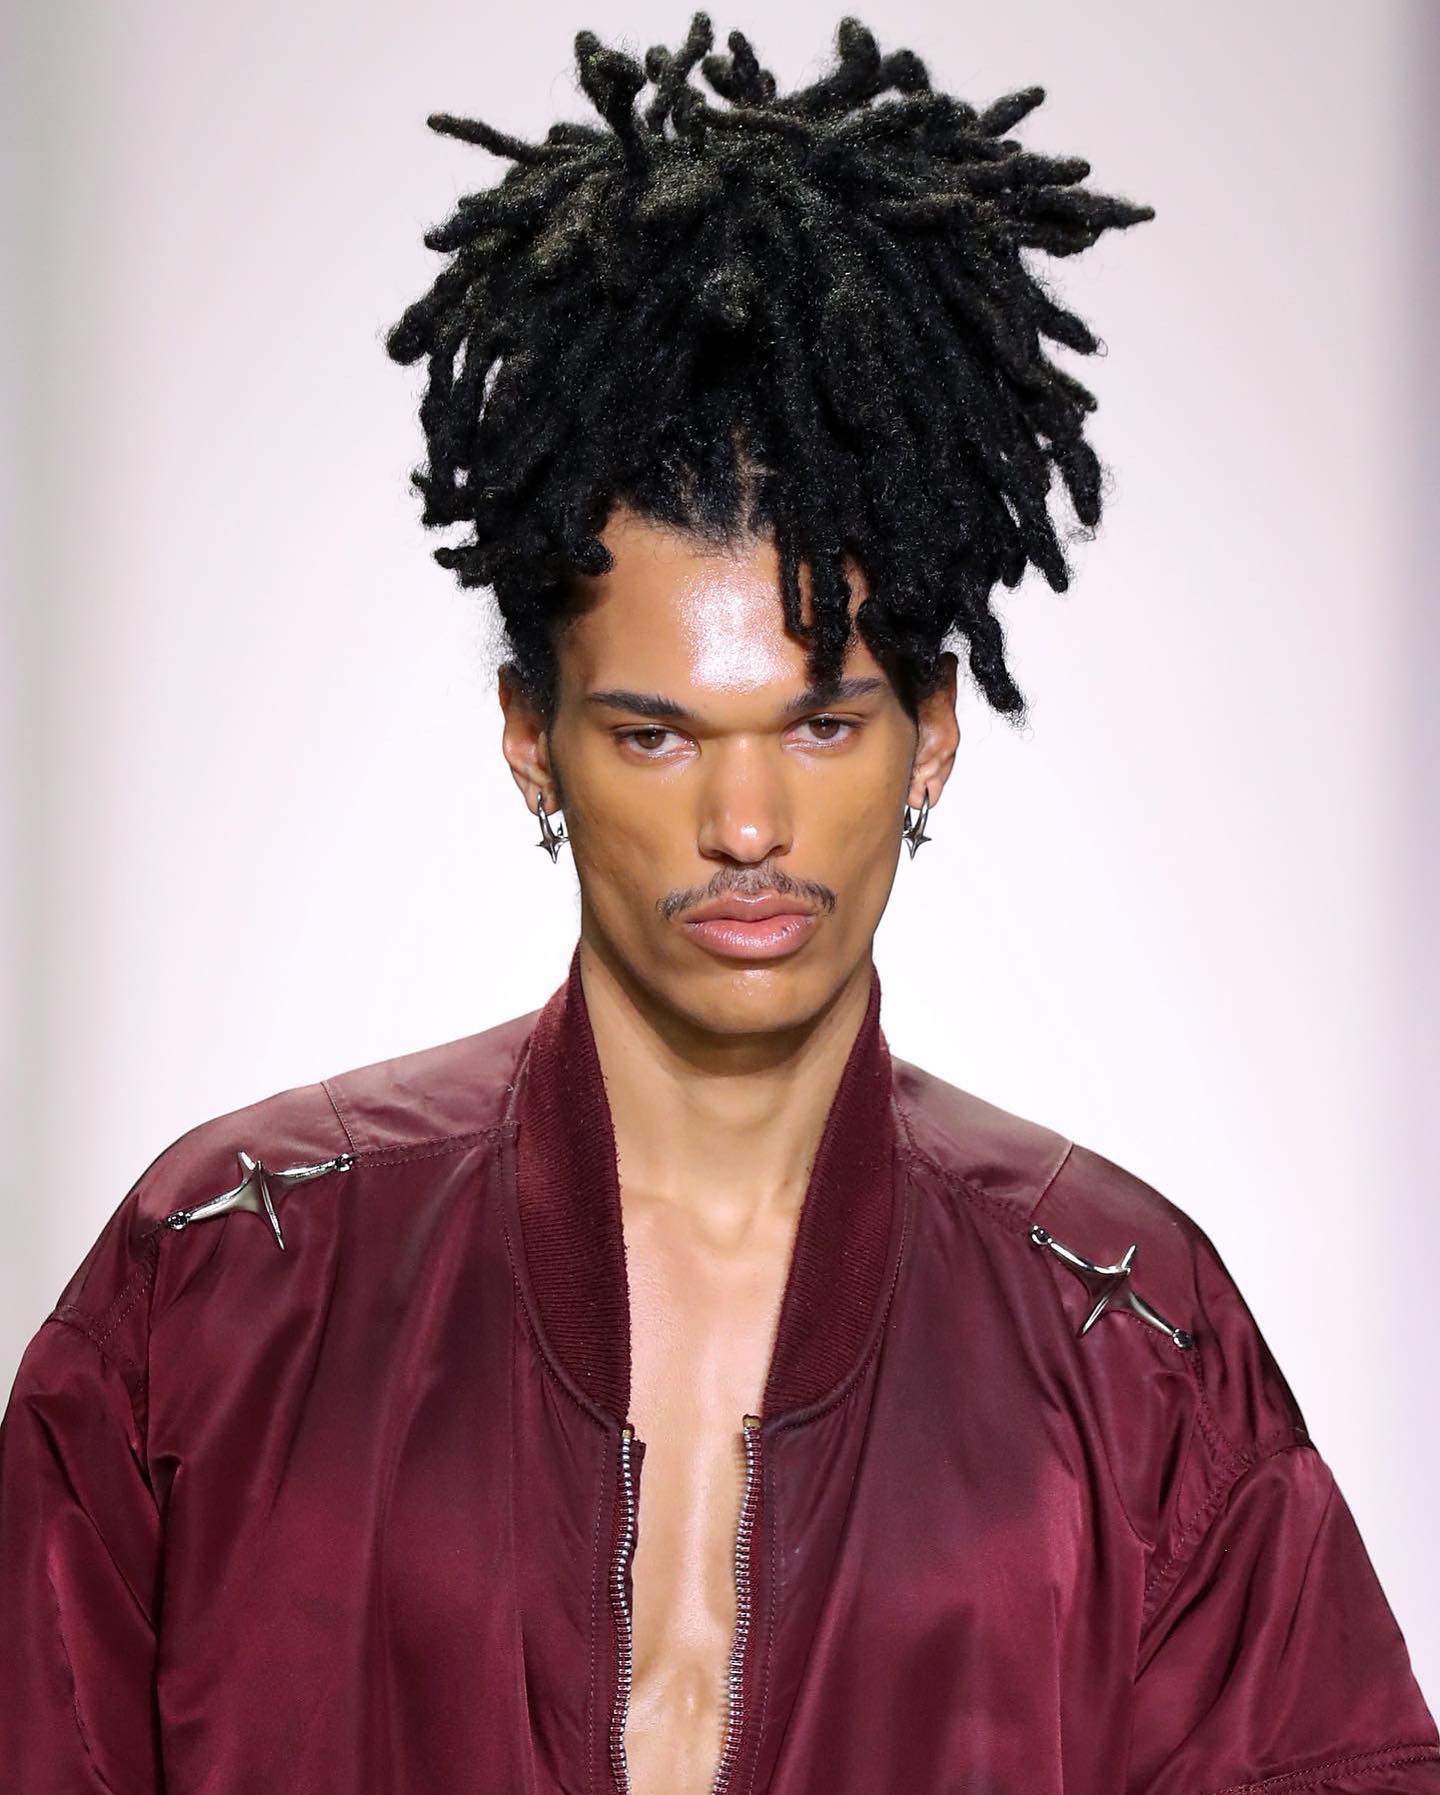 Image of Pineapple Dreads inspired by Dreadlocks Hairstyles for Men